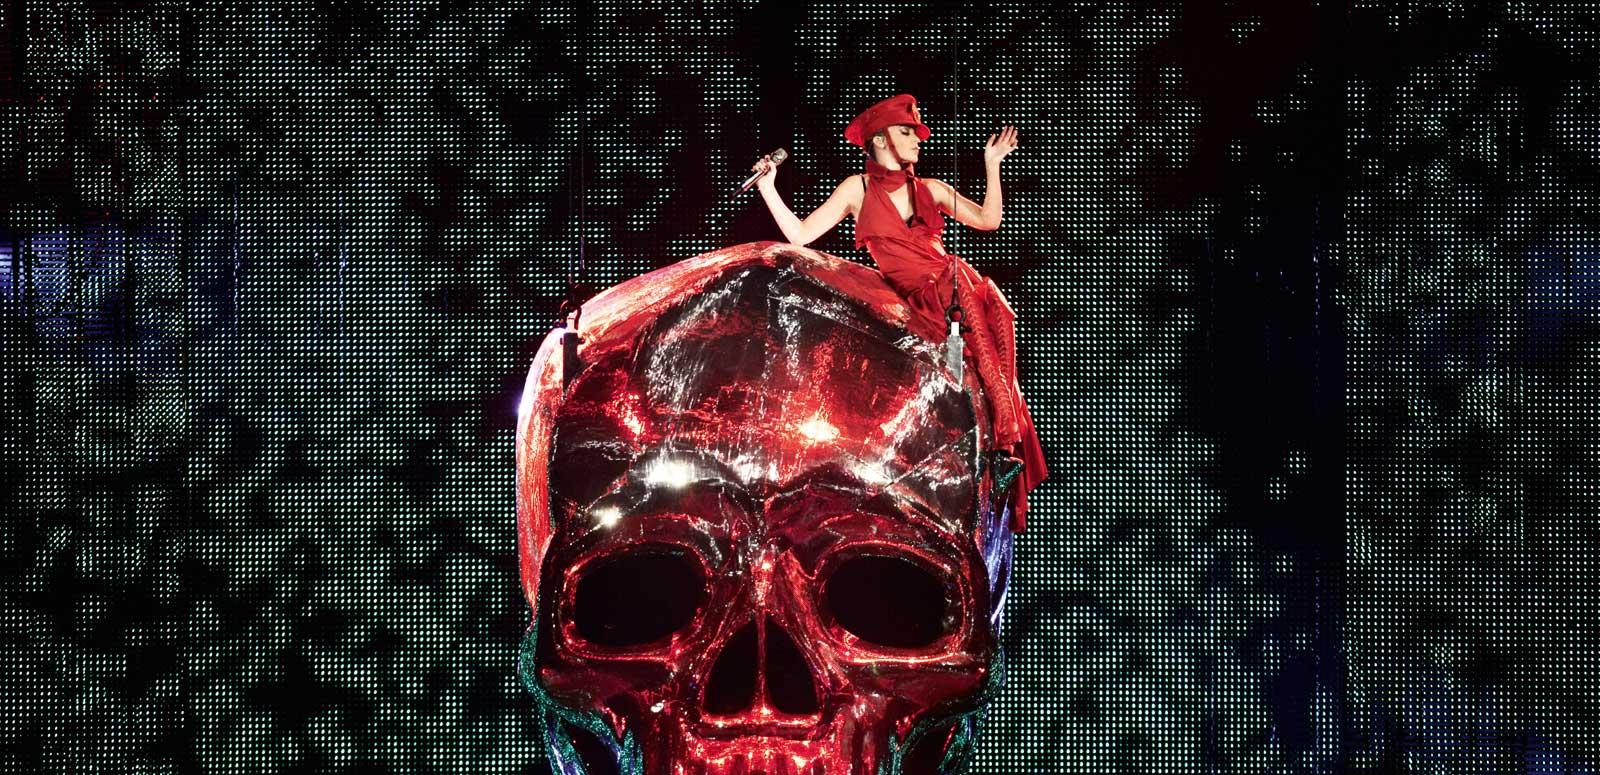 Kylie Minogue, dressed entirely in red, is sitting on top of a giant red shiny skull prop at one of her live shows. 